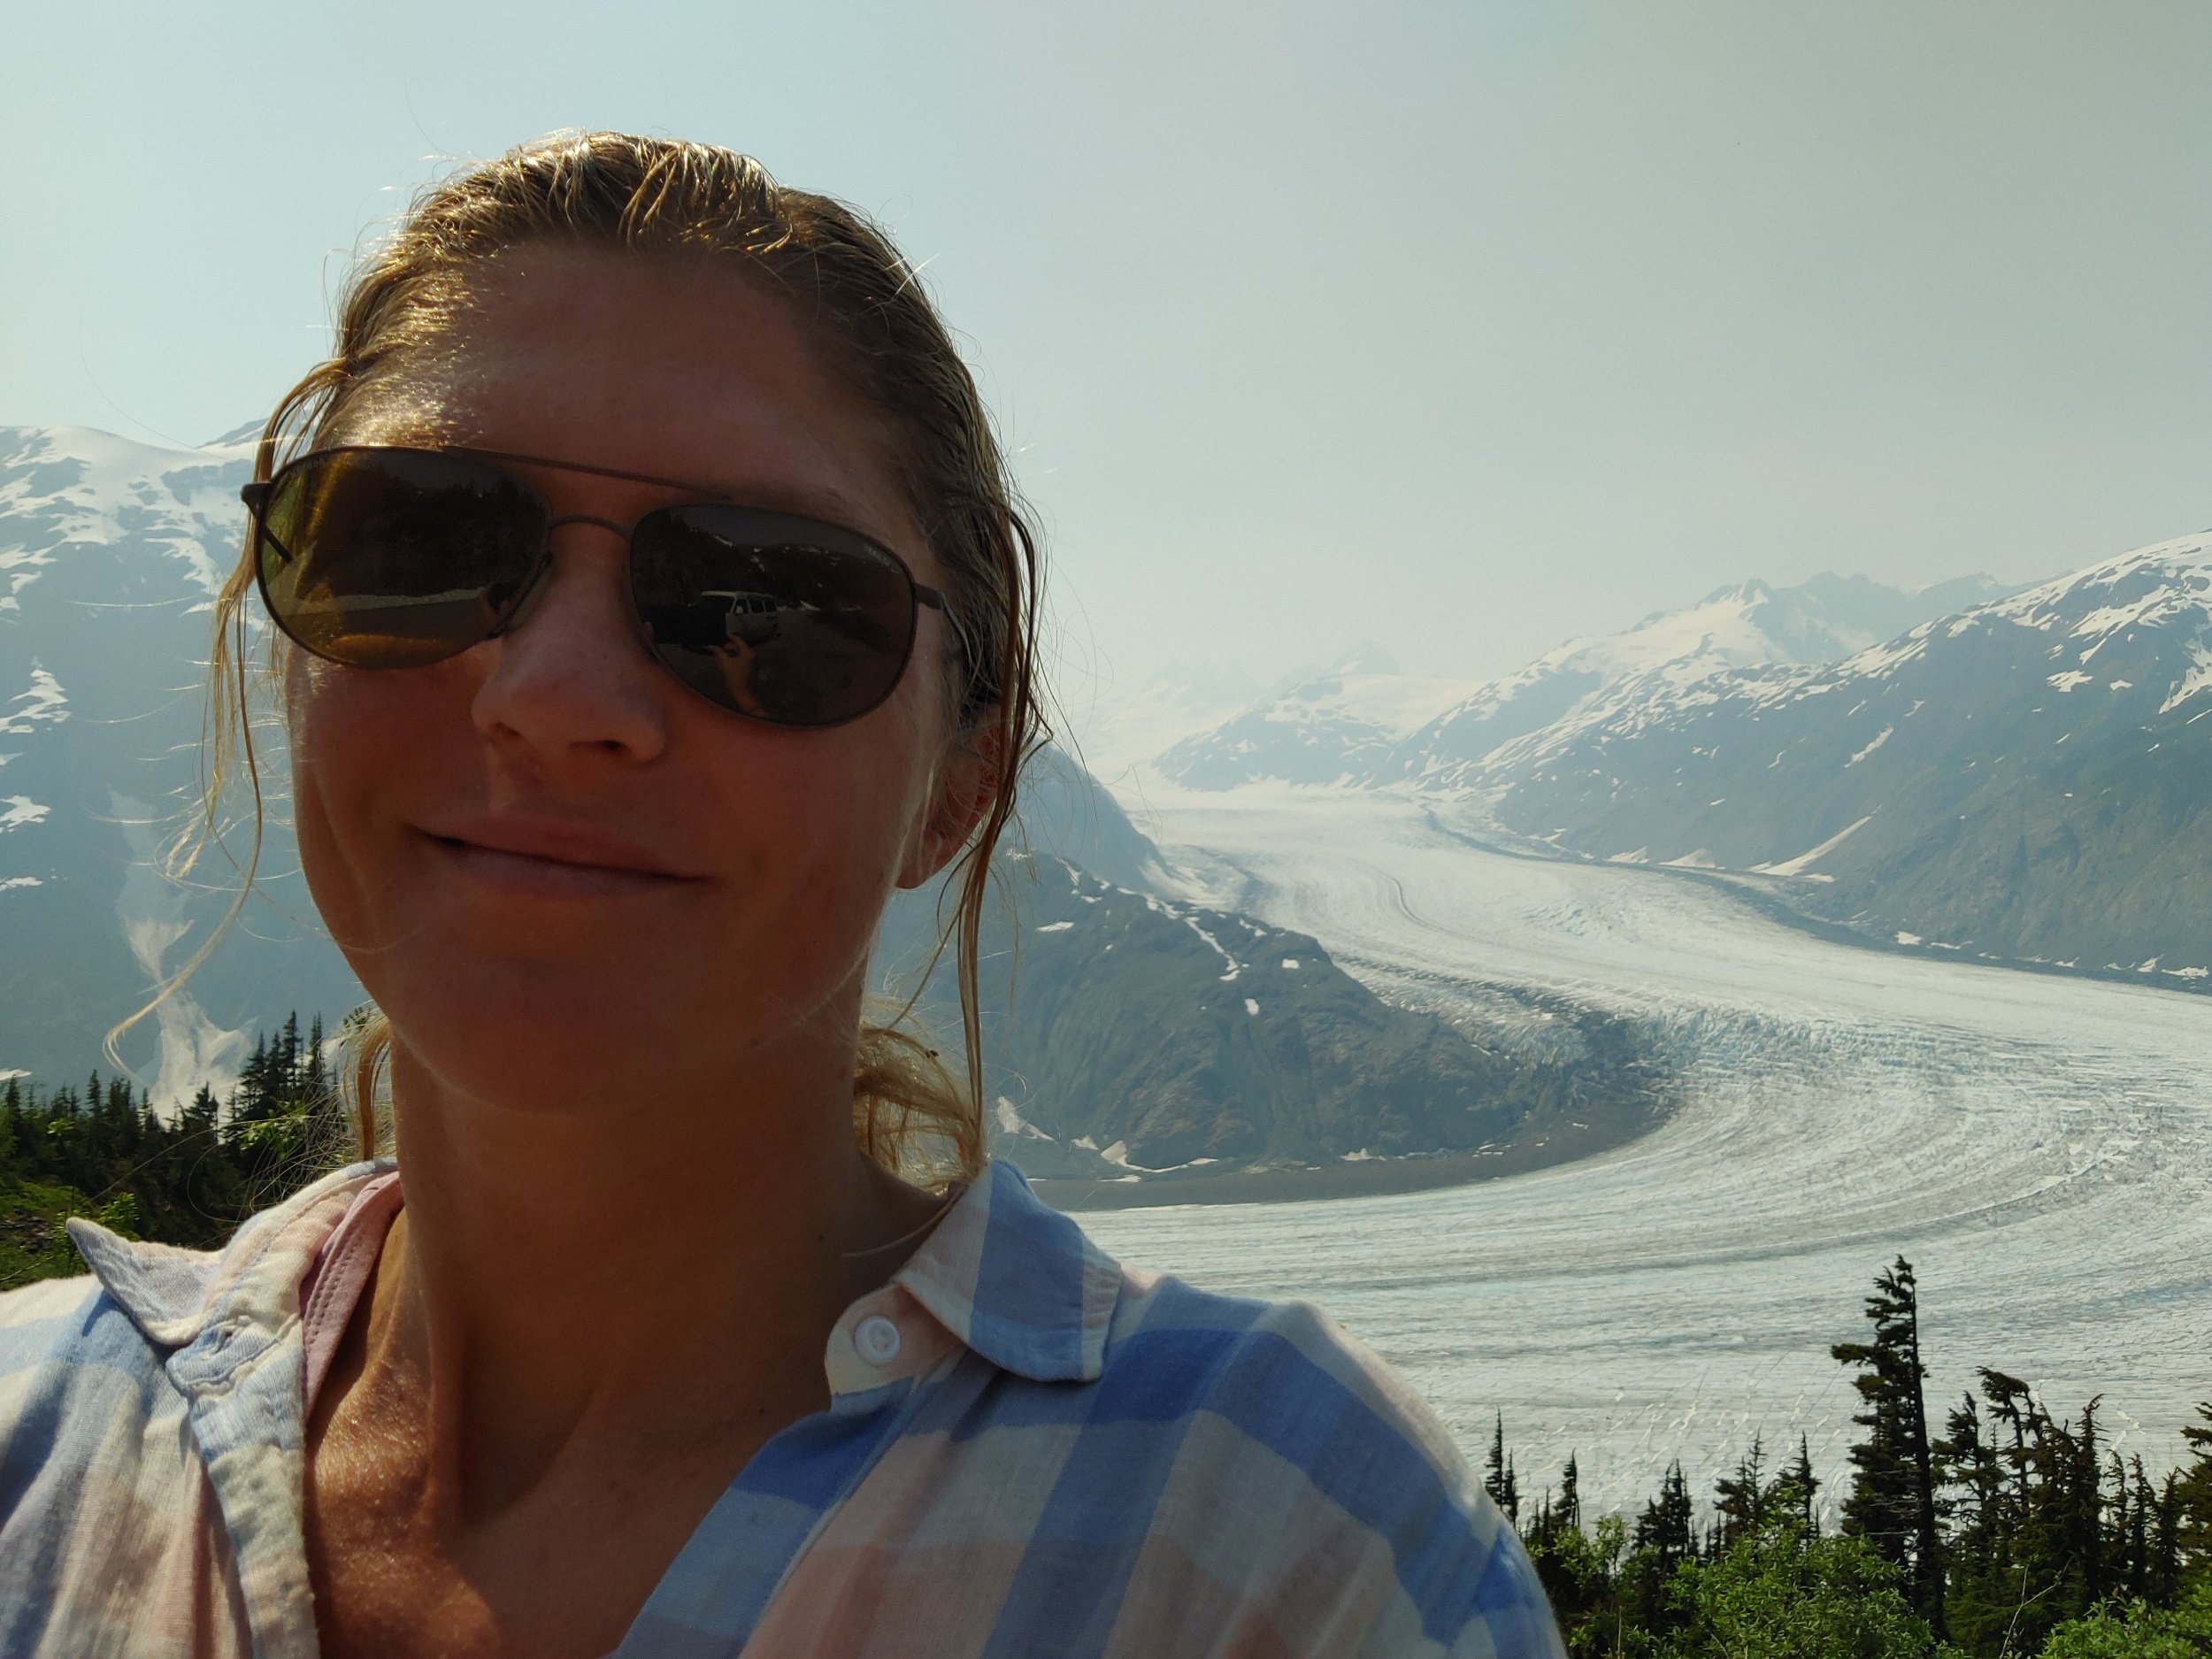  It is 30C even all the way up here. Trippy to be sweating while on top of a mountain looking down onto a glacier.  I think there is a way to walk down to the glacier but it’s too hot to try.   I decided to take a little bird bath in nearby glacial s